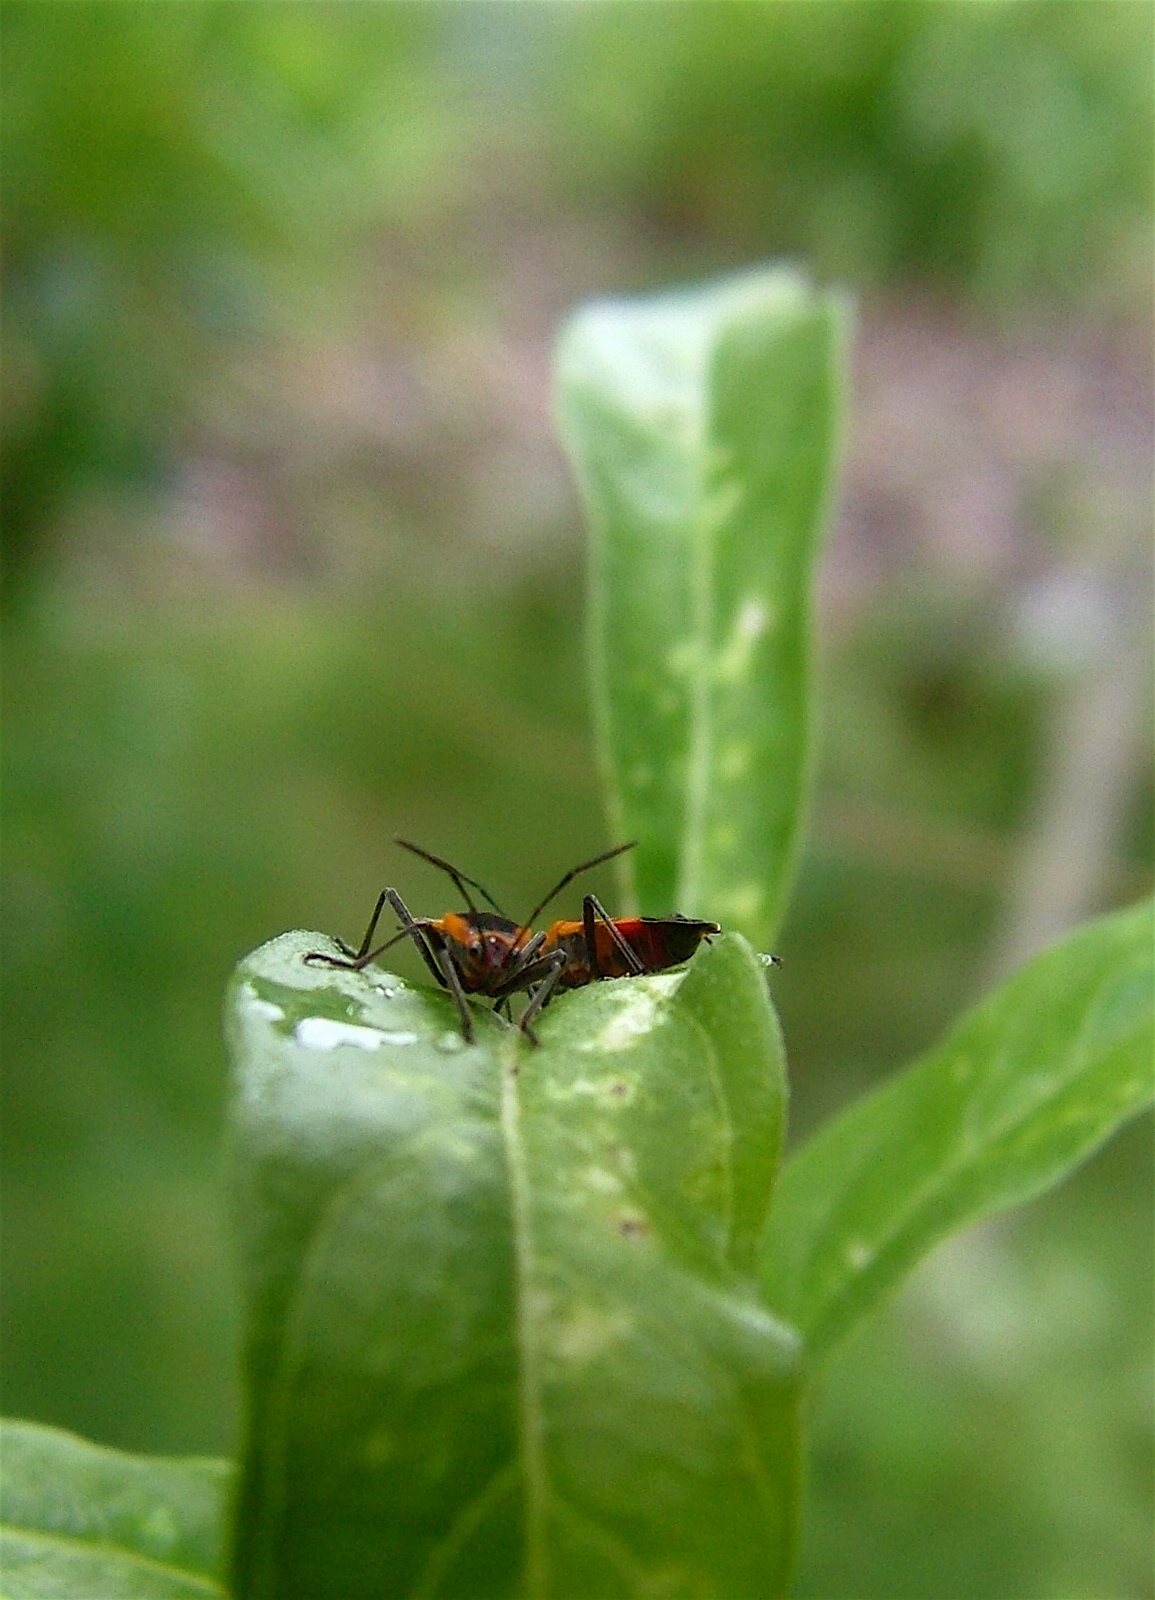 a couple of bugs are sitting on the edge of a leaf